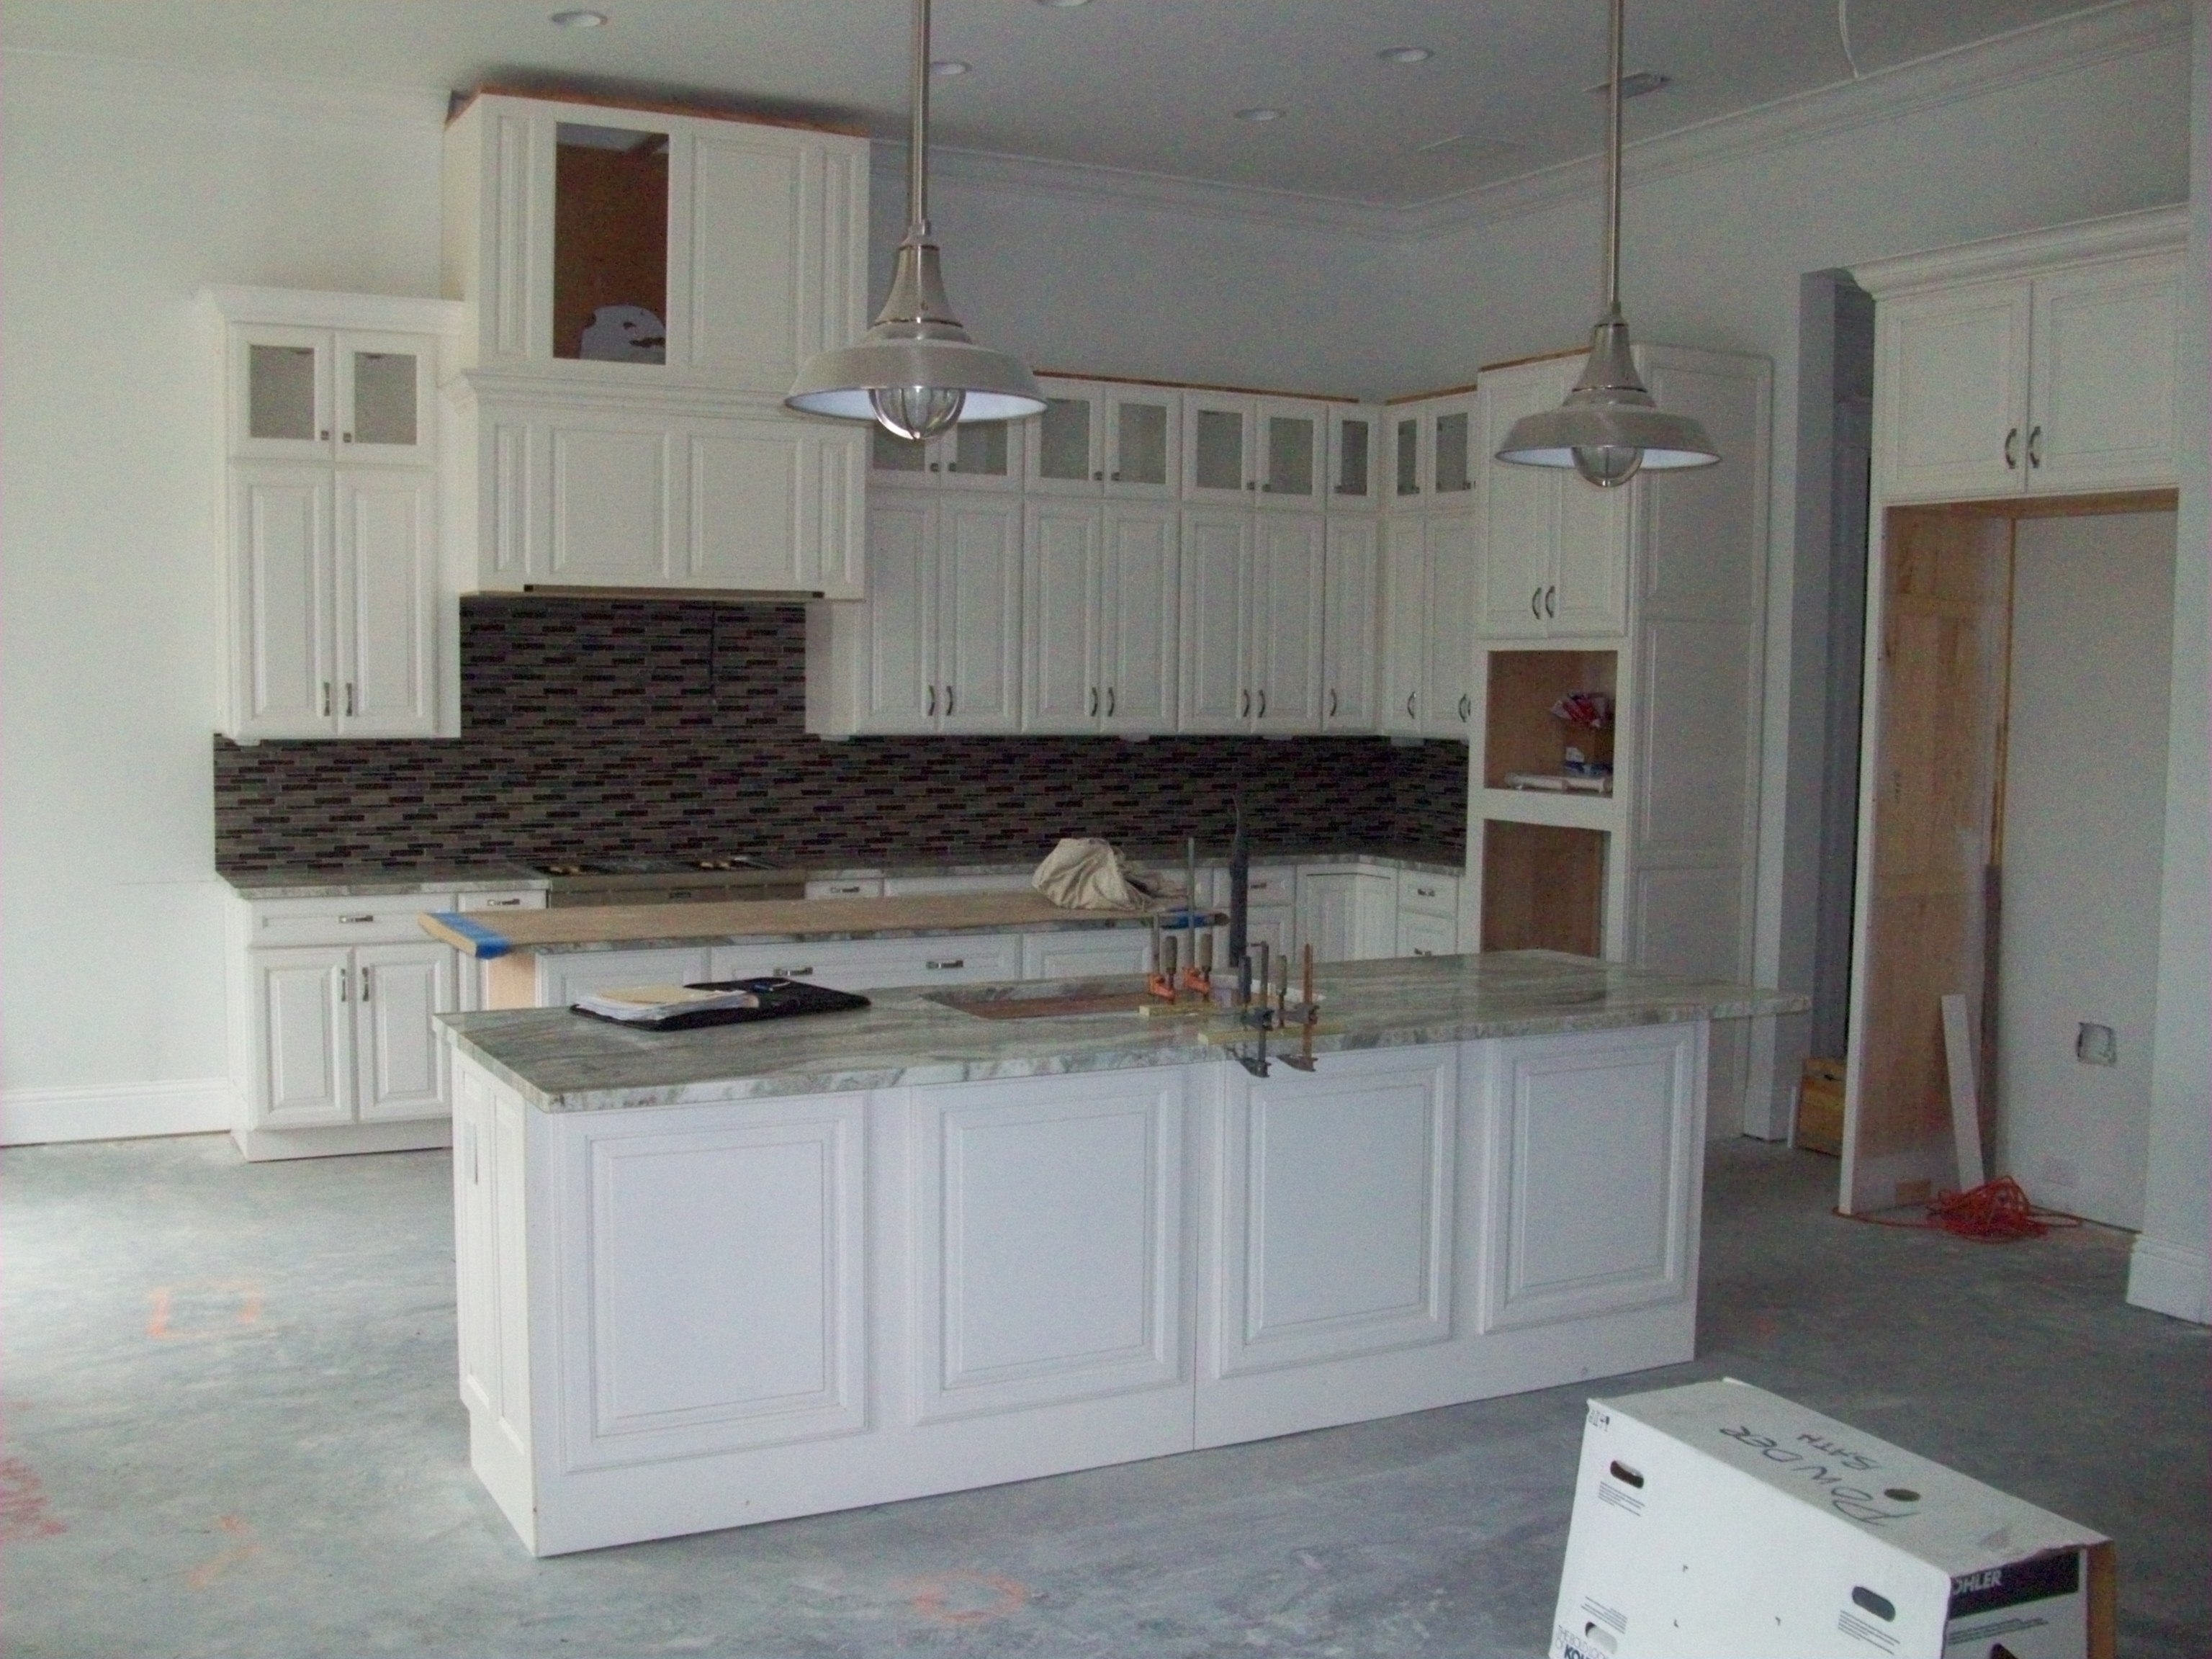 Cabinet installation at Southern Living Showcase Home - UPDATE